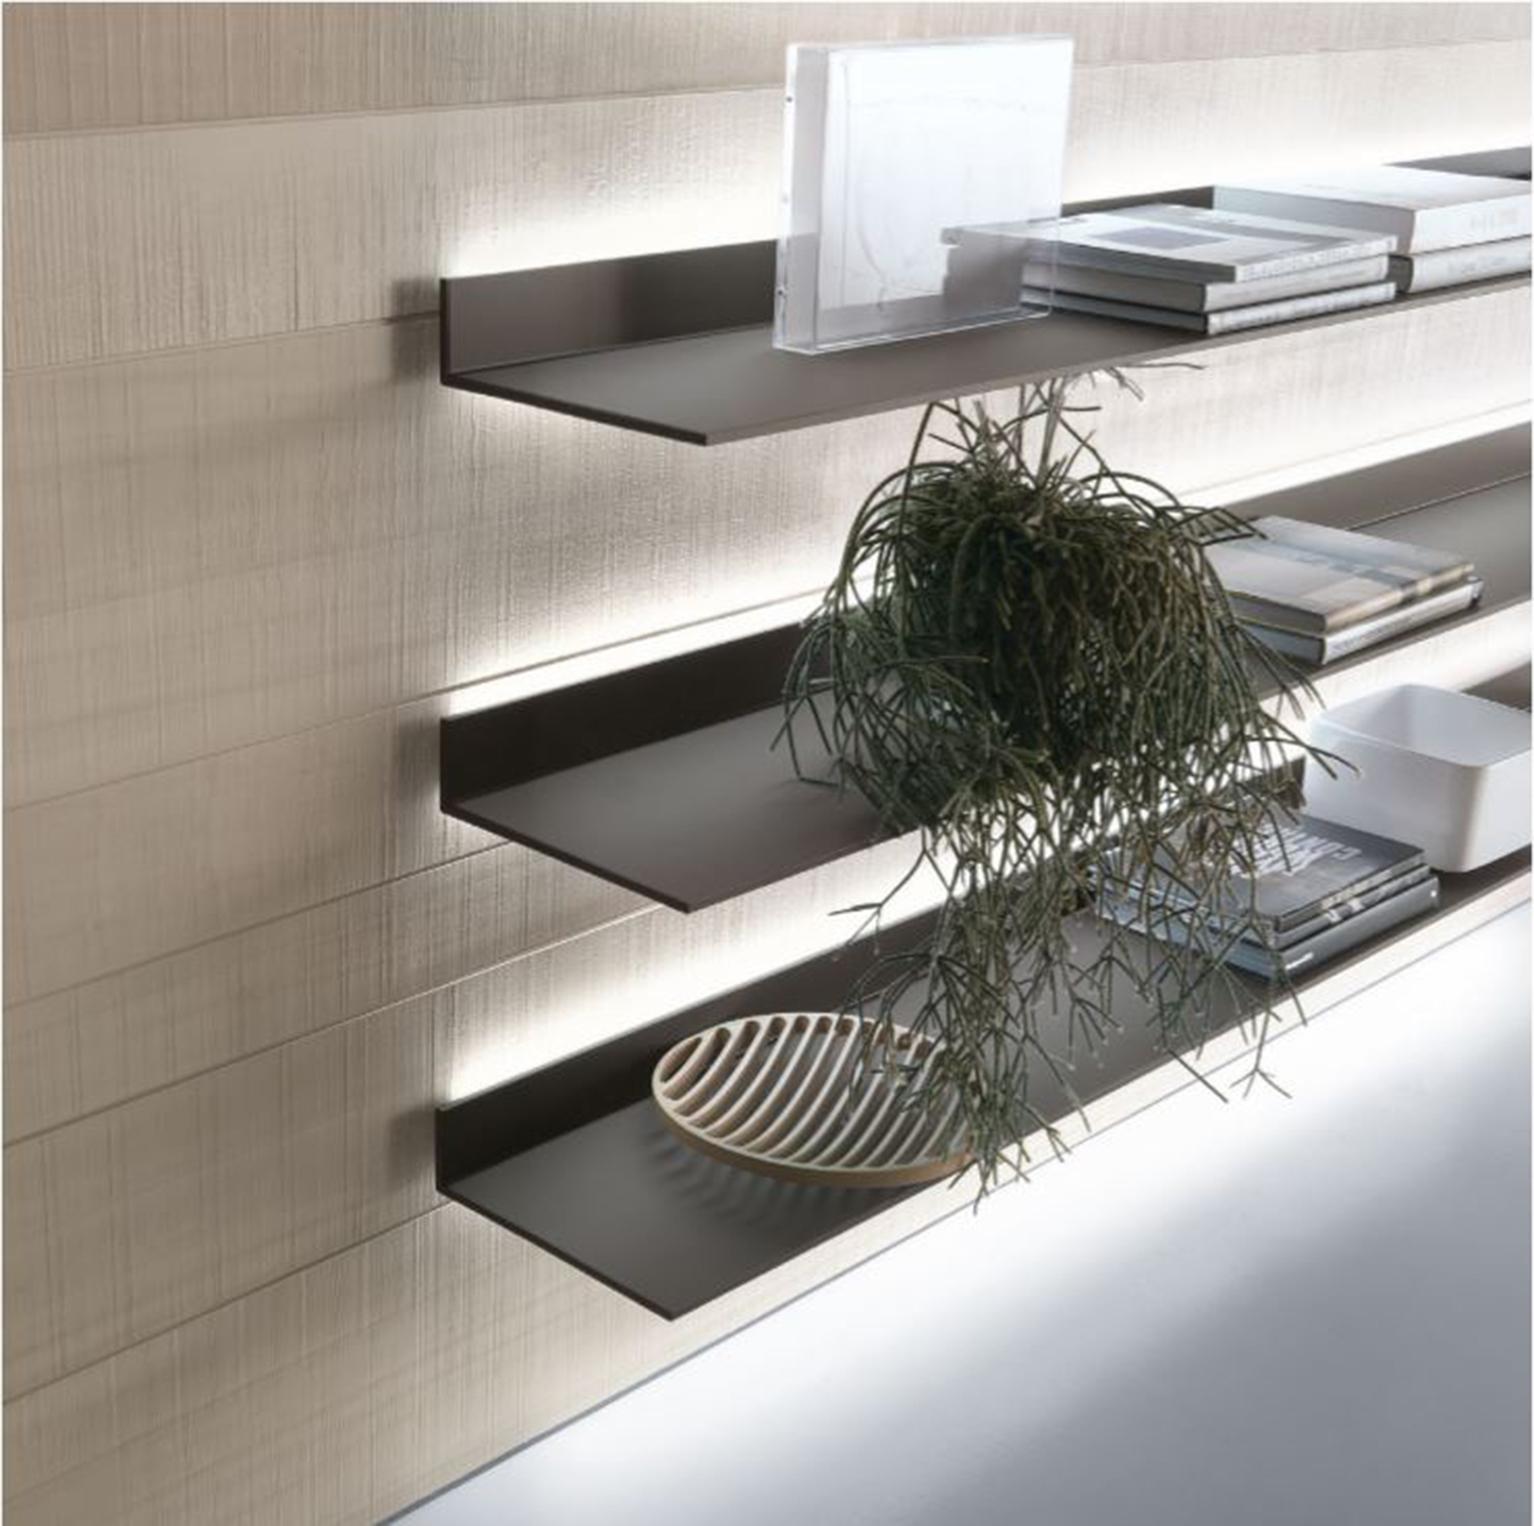 The Eos Shelf, designed by Giuseppe Bavuso, is an innovative wall shelving system. With a thickness of only 8 mm, the Eos design combines a lacquered glass top with a lacquered aluminum frame. The wall fixing system ensures installation with no